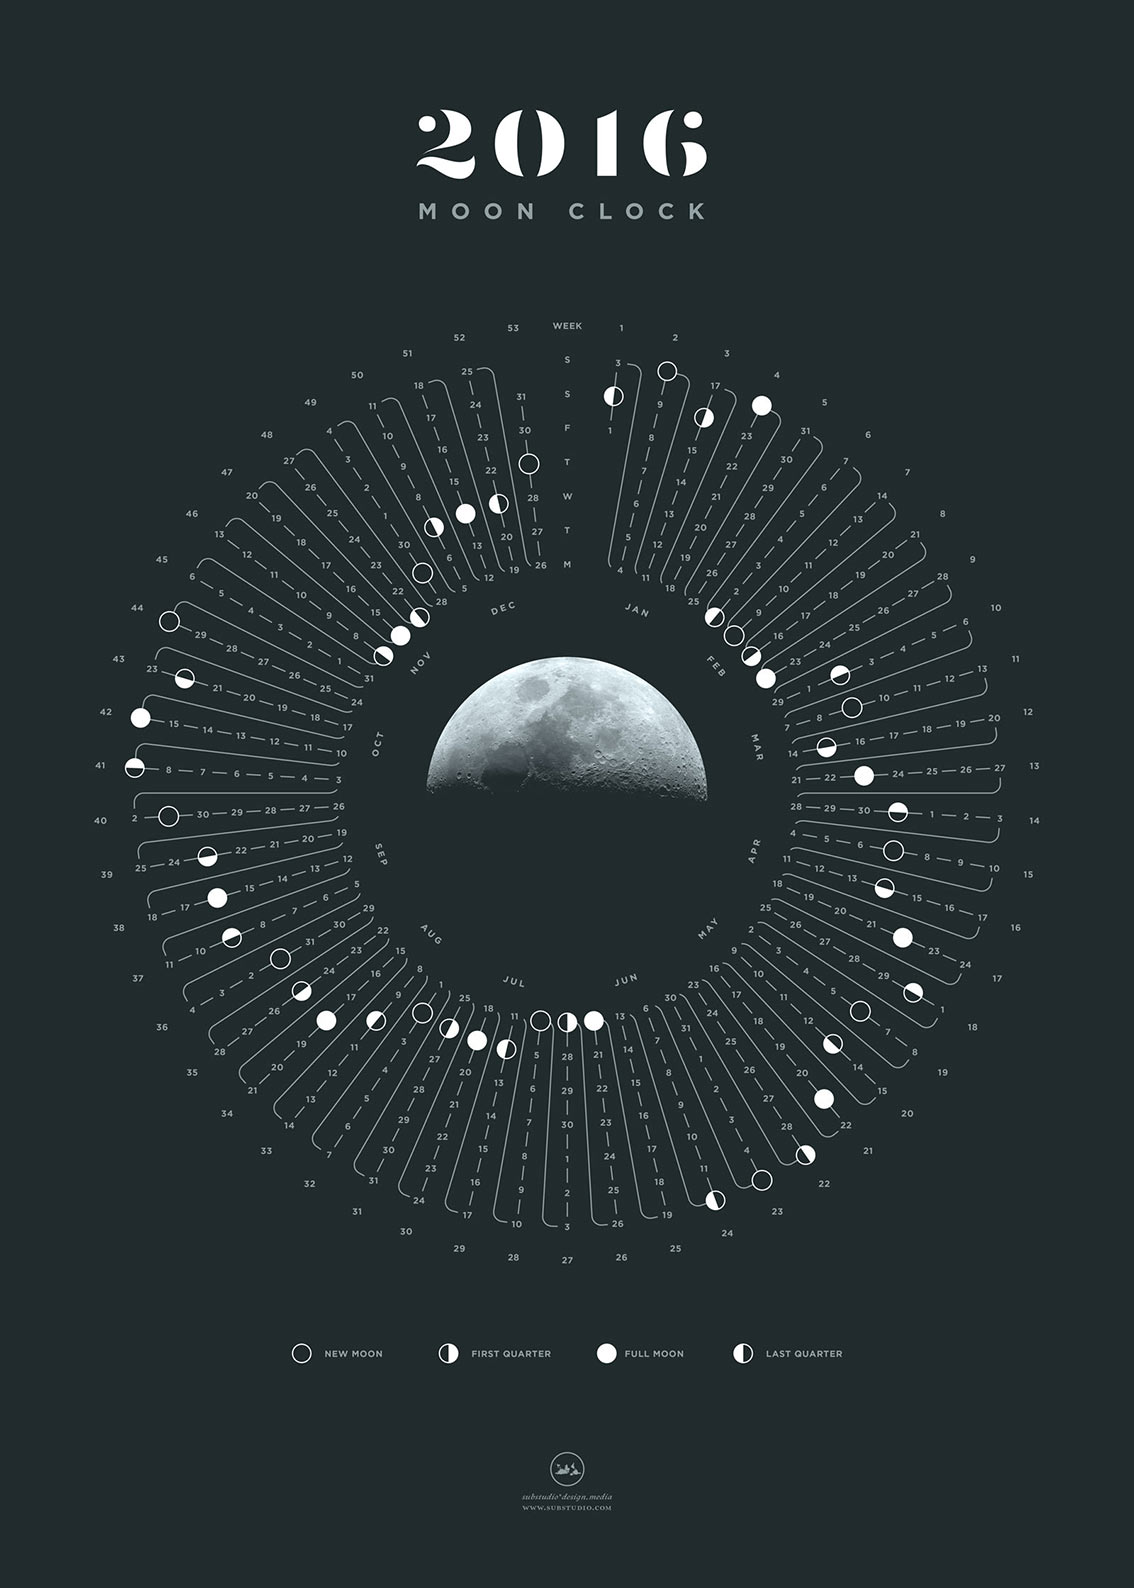 2016 Moon Clock Yearly Calendar Infographic